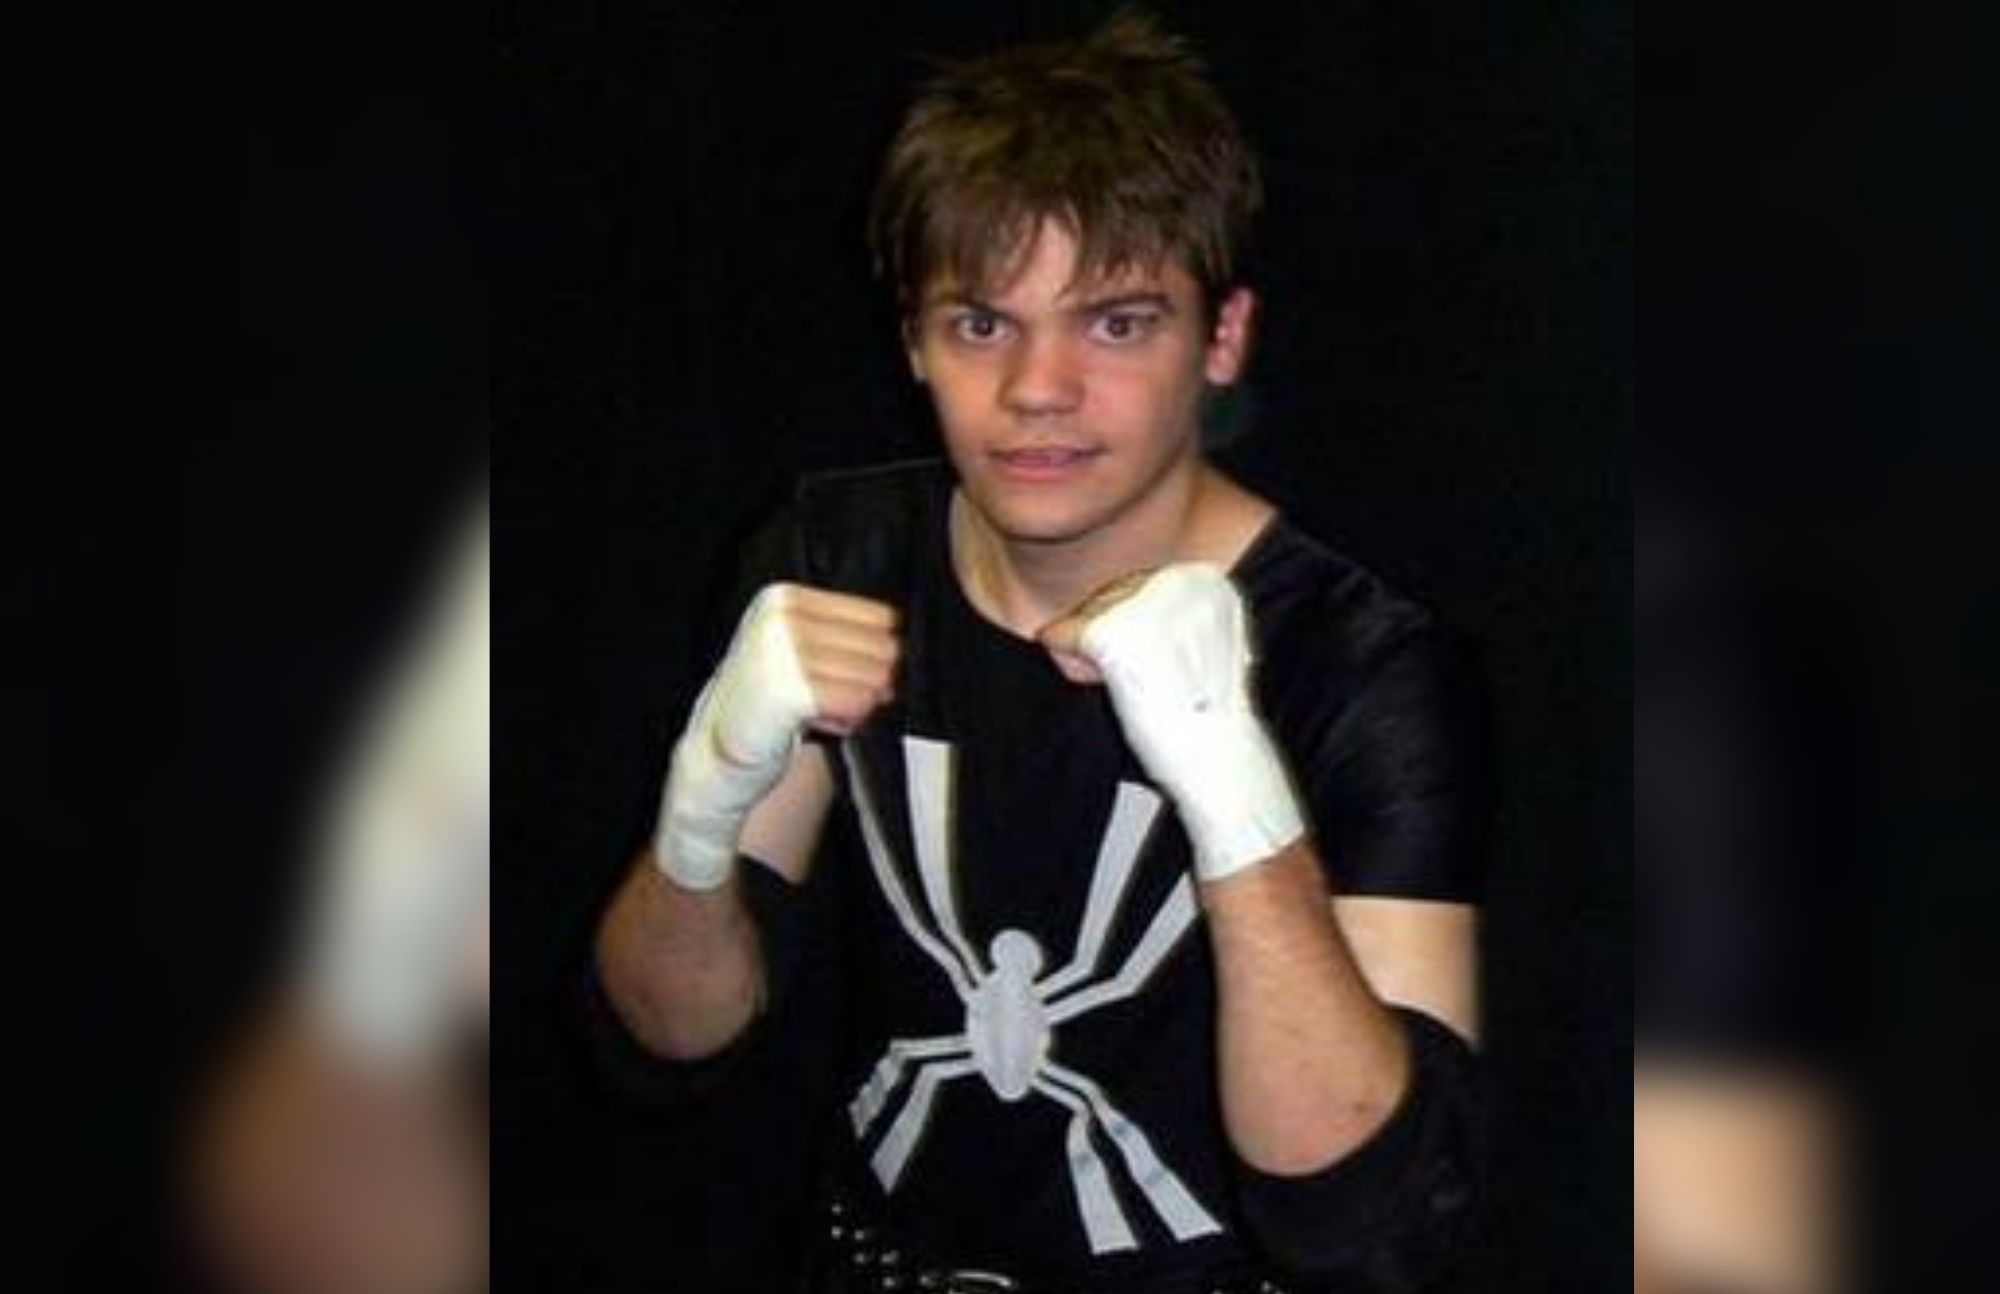 Daniel "Spider" Quirk is clothed in a spider-themed black shirt, with his hands level and his elbows tucked in his sides